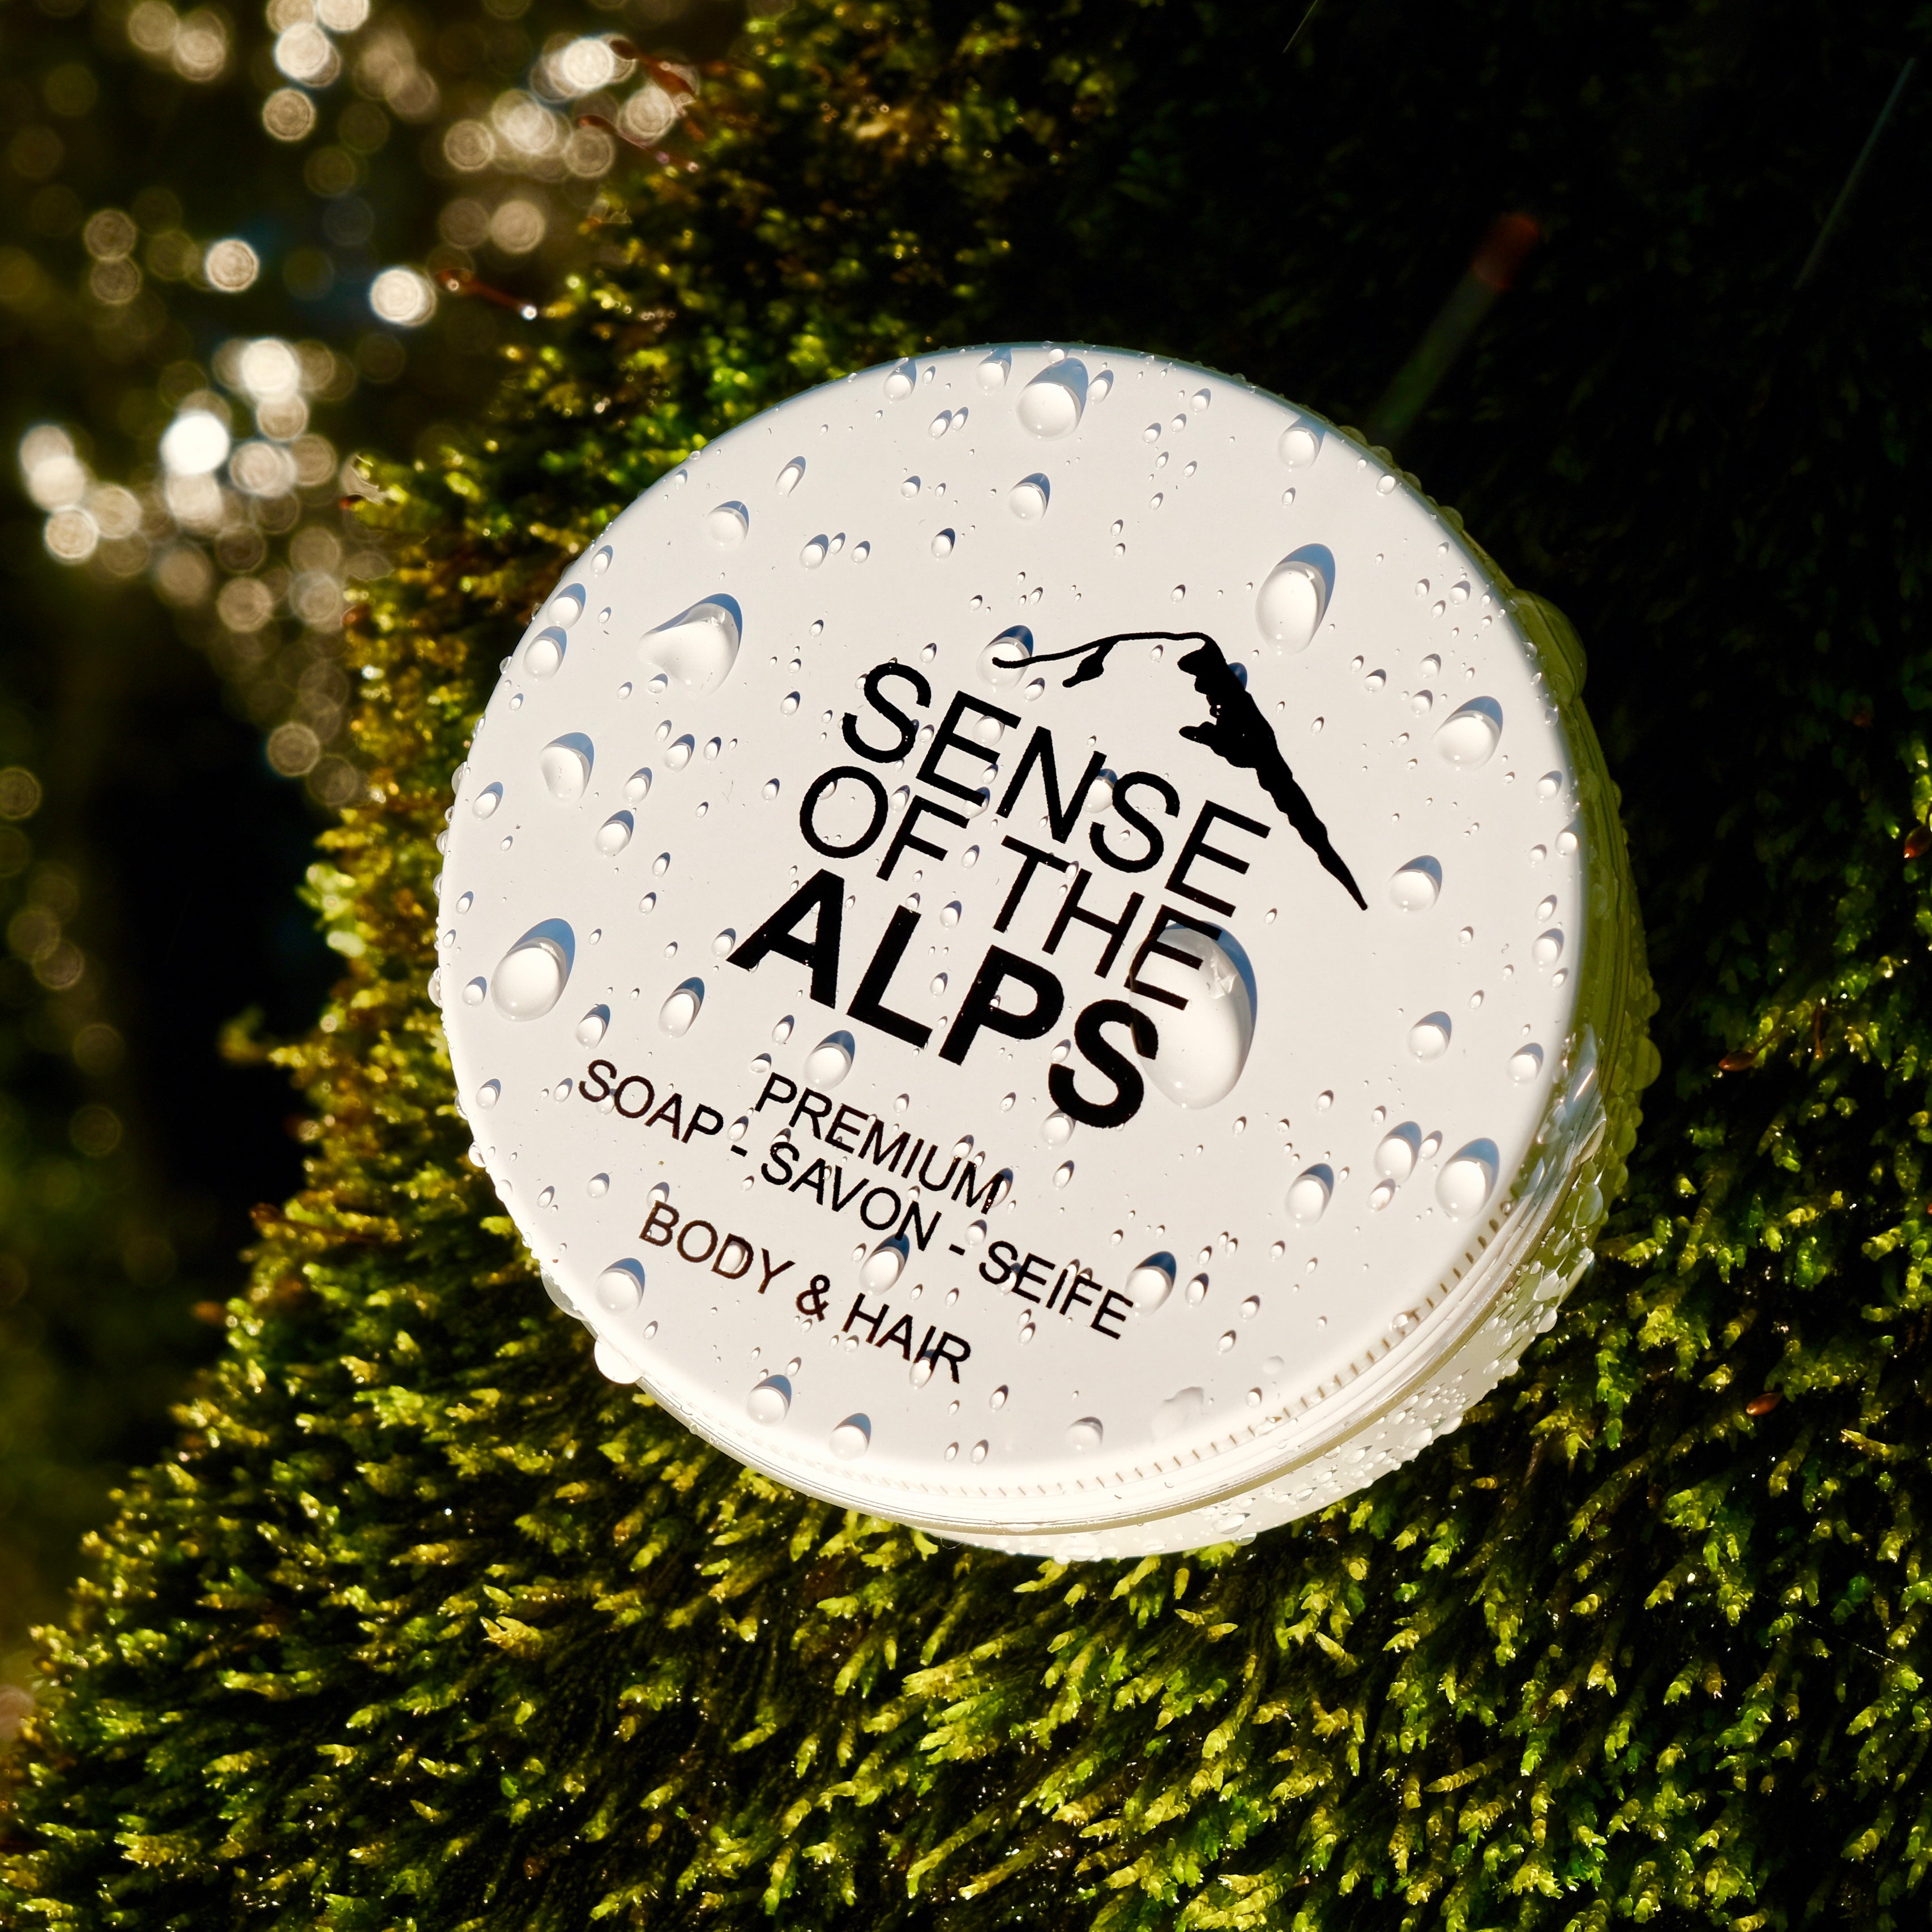 Natural soap with 7 Alpine plants - Sense of the Alps